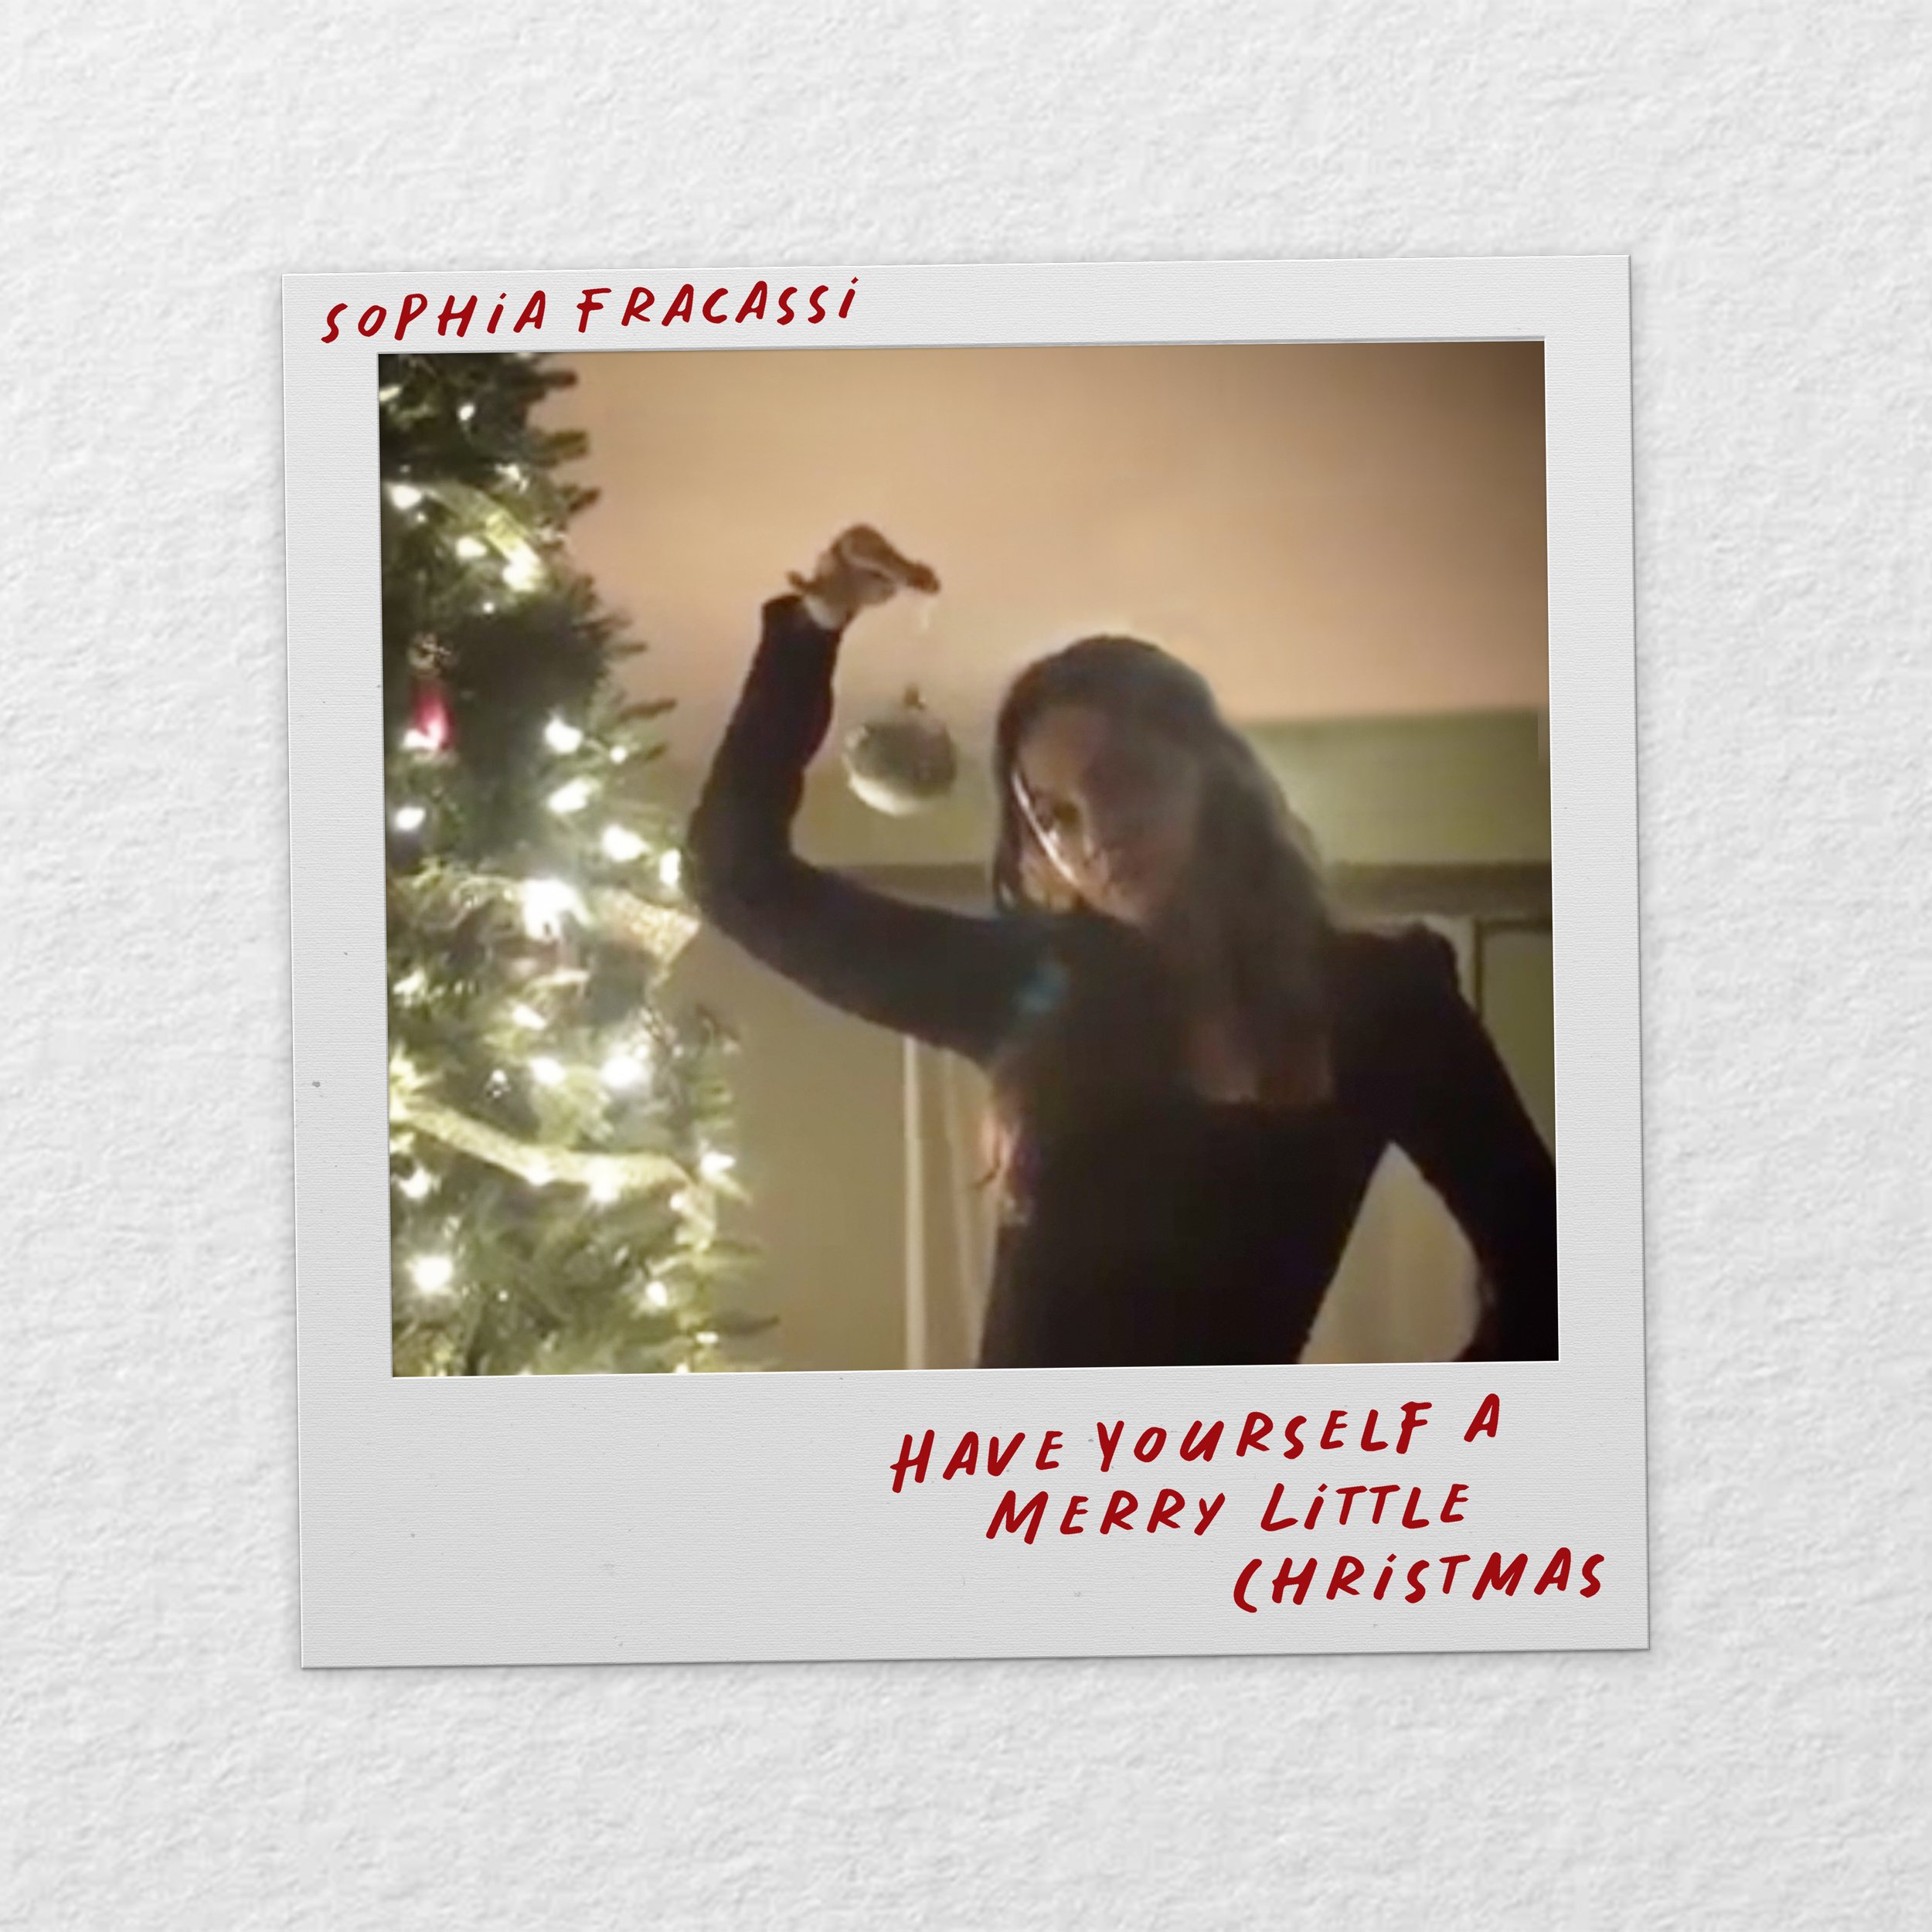 SOPHIA FRACASSI - Have Yourself a Merry Little Christmas